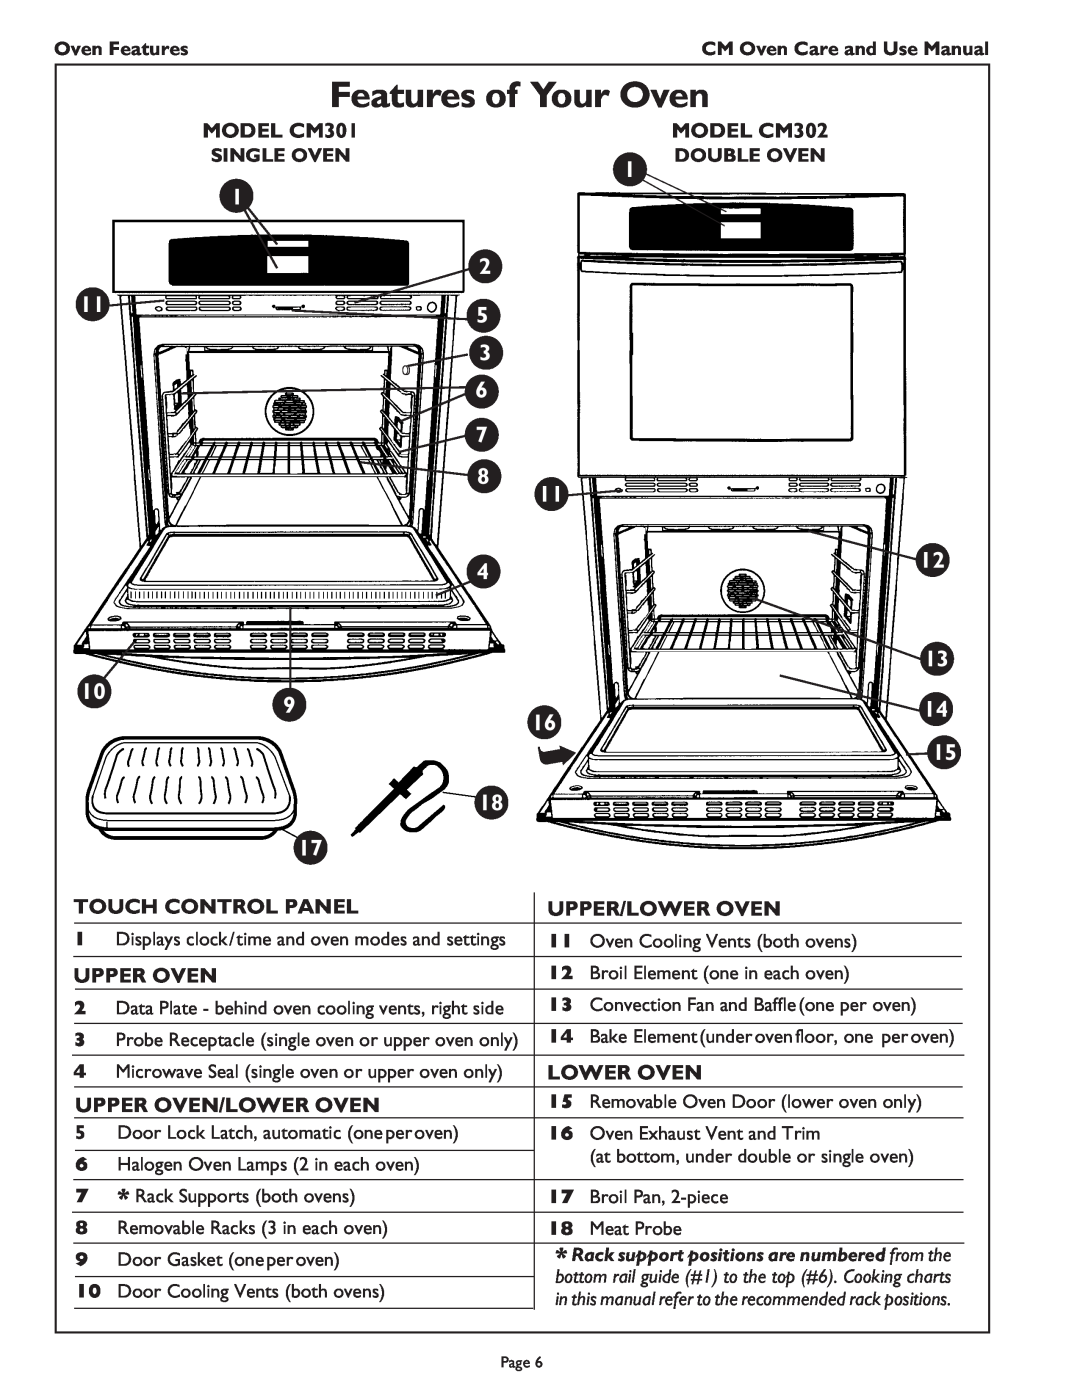 Thermador manual Features of Your Oven, MODEL CM301, MODEL CM302, Touch Control Panel, Upper/Lower Oven, Upper Oven 